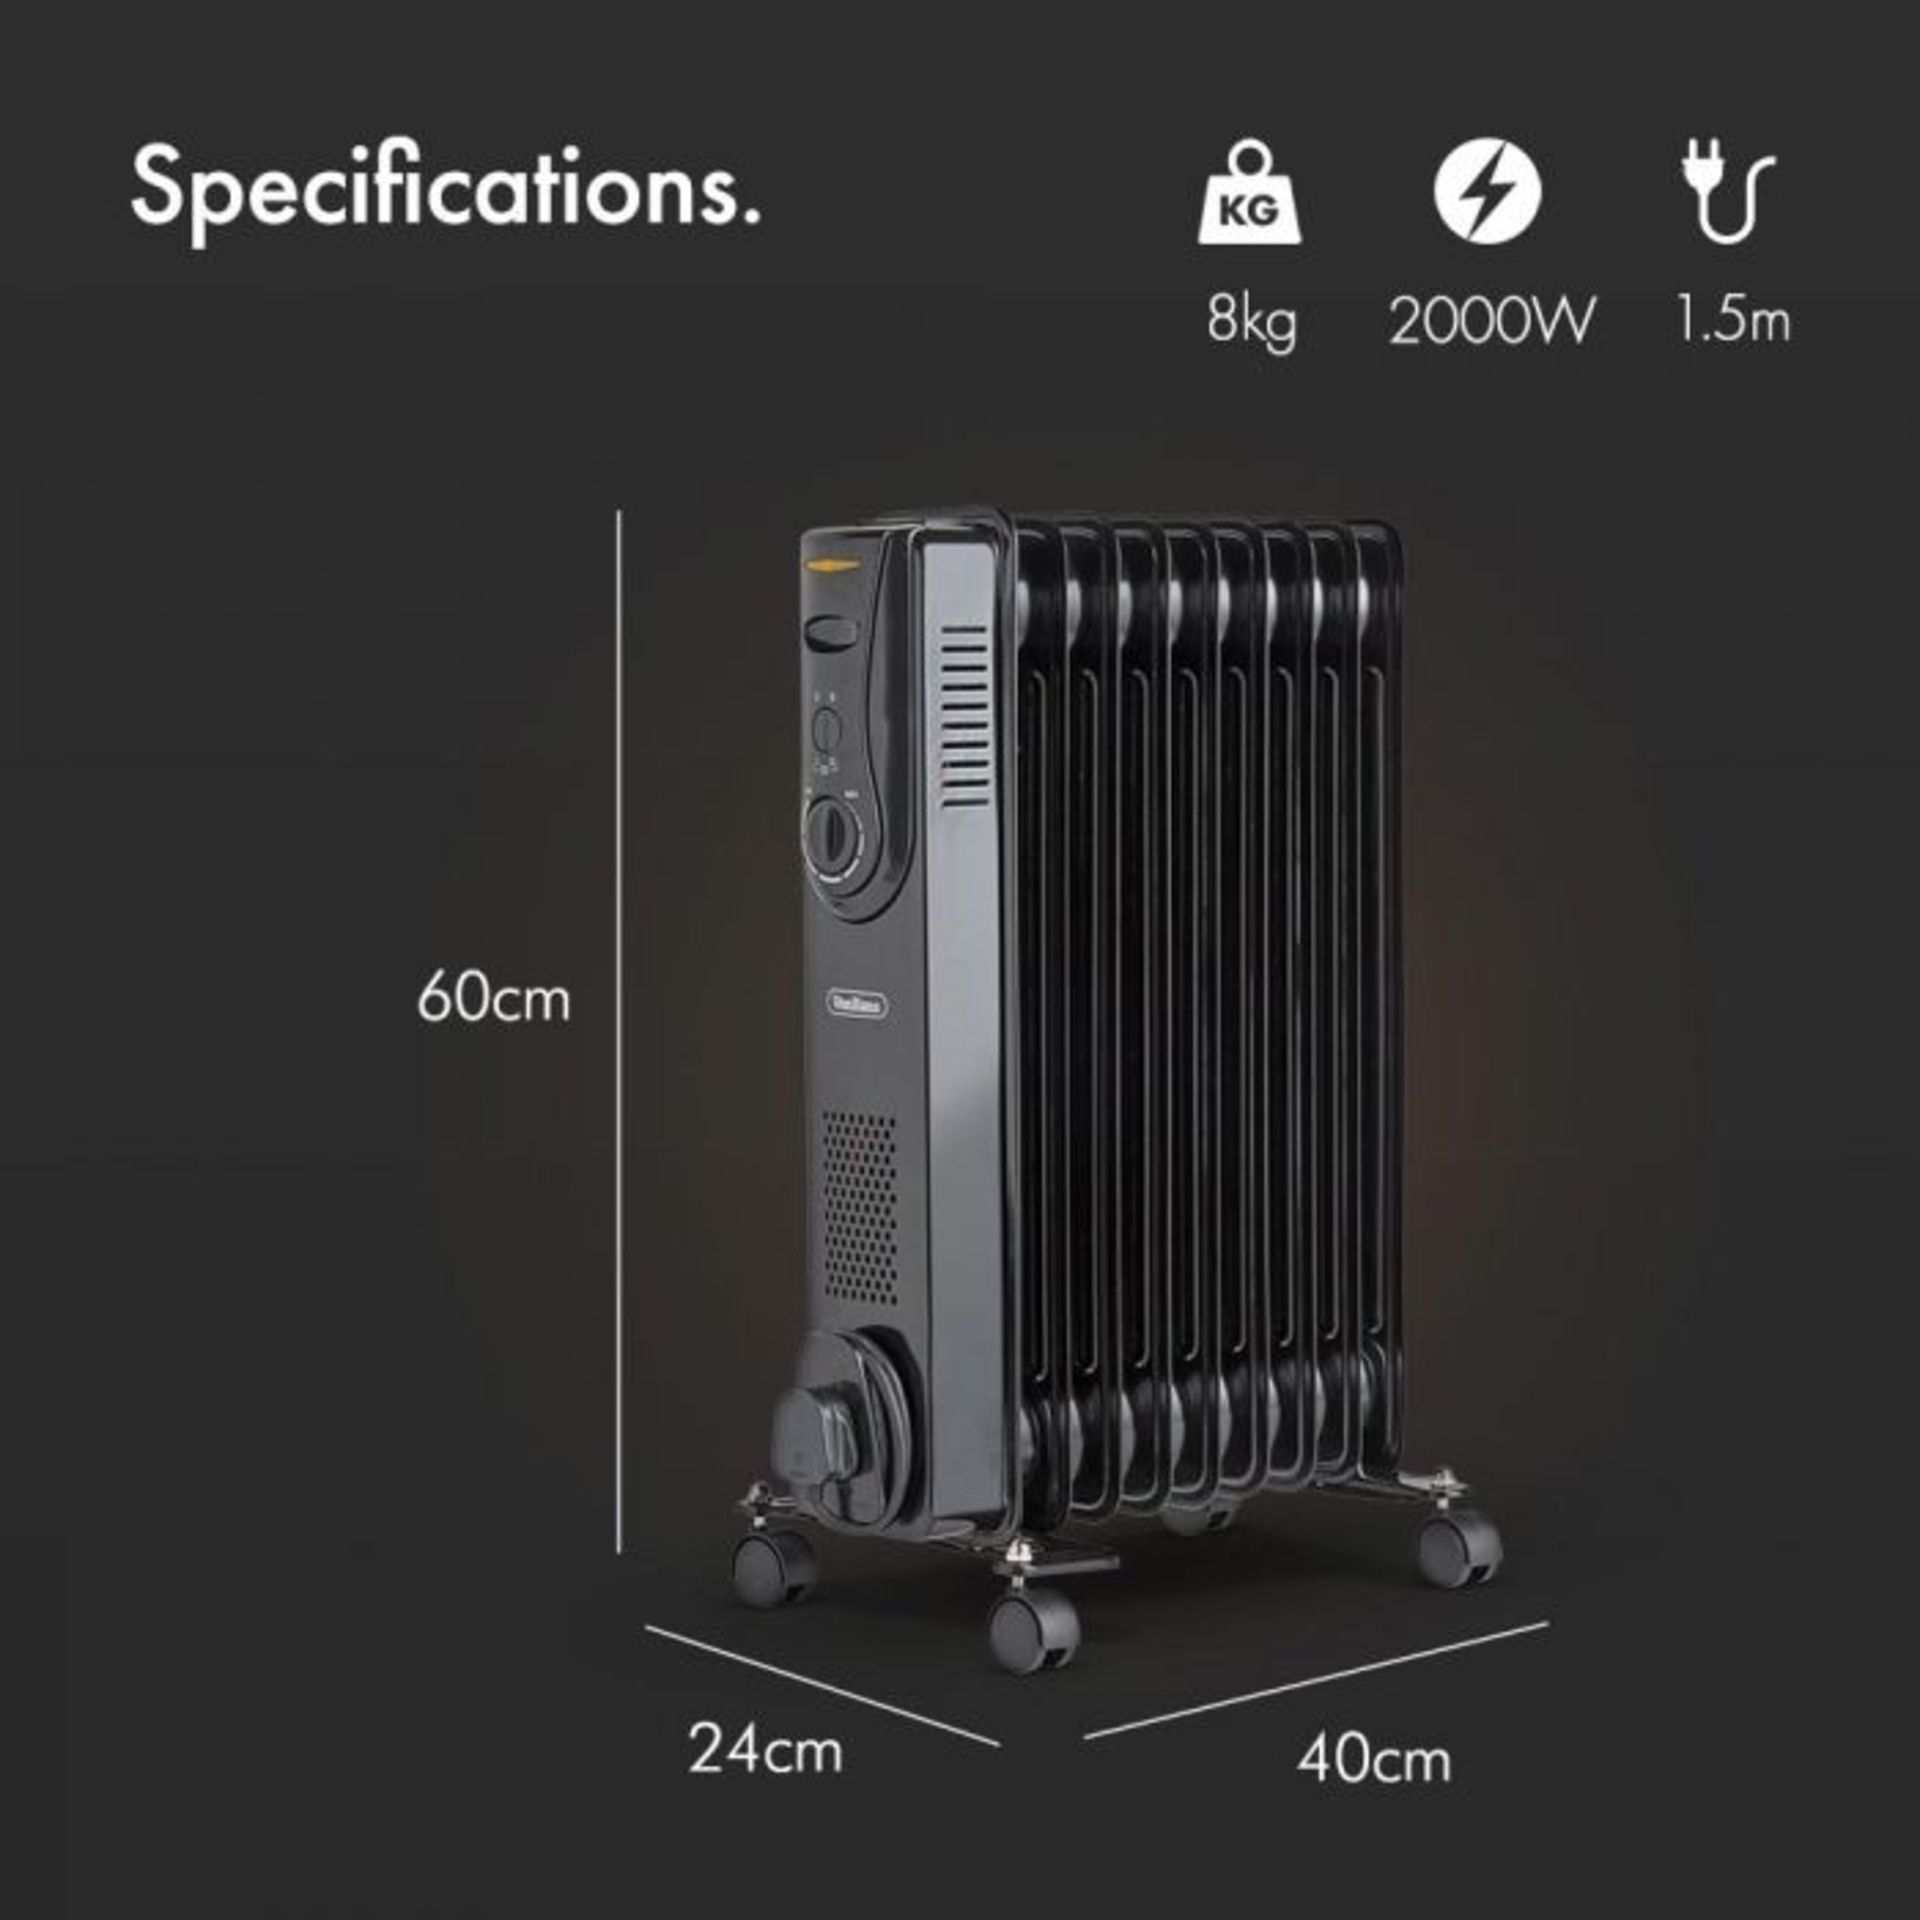 (S315) 9 Fin 2000W Oil Filled Radiator - Black Powerful 2000W radiator with 9 oil-filled fins ... - Image 2 of 8